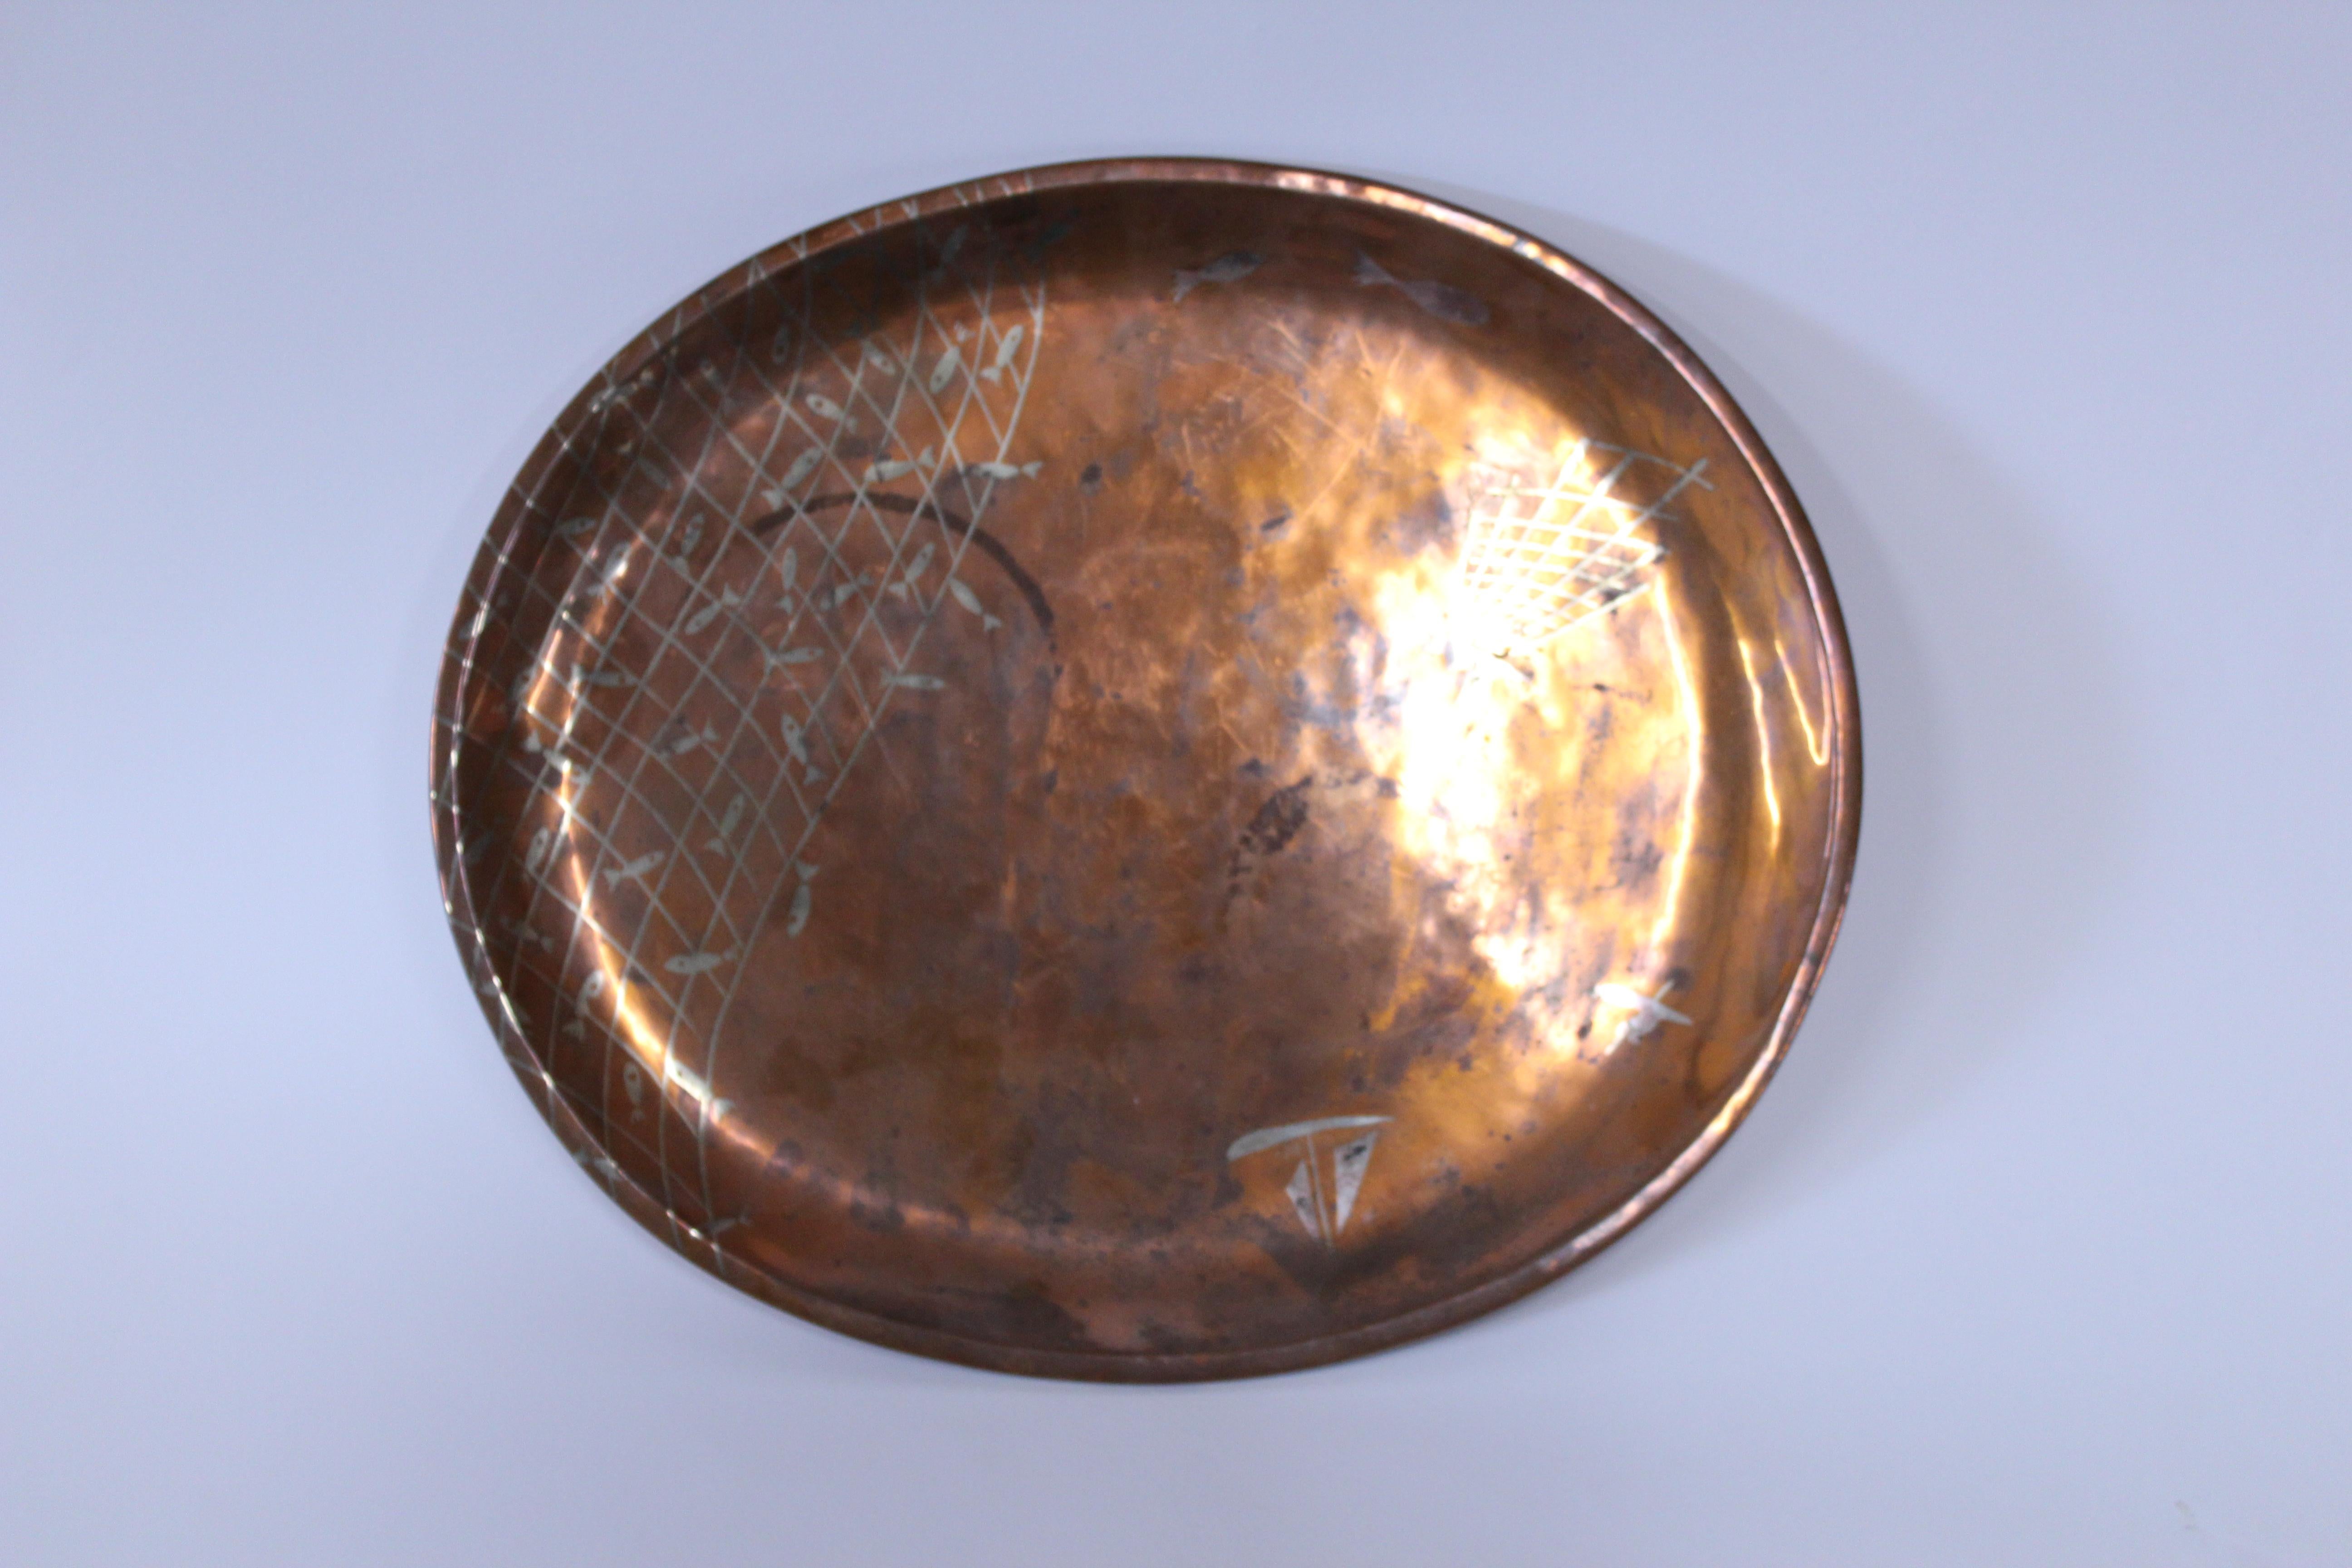 Los Castillo hallmarked round serving tray of copper/mixed metals with abstract boat and fishing net design from the 1950s.